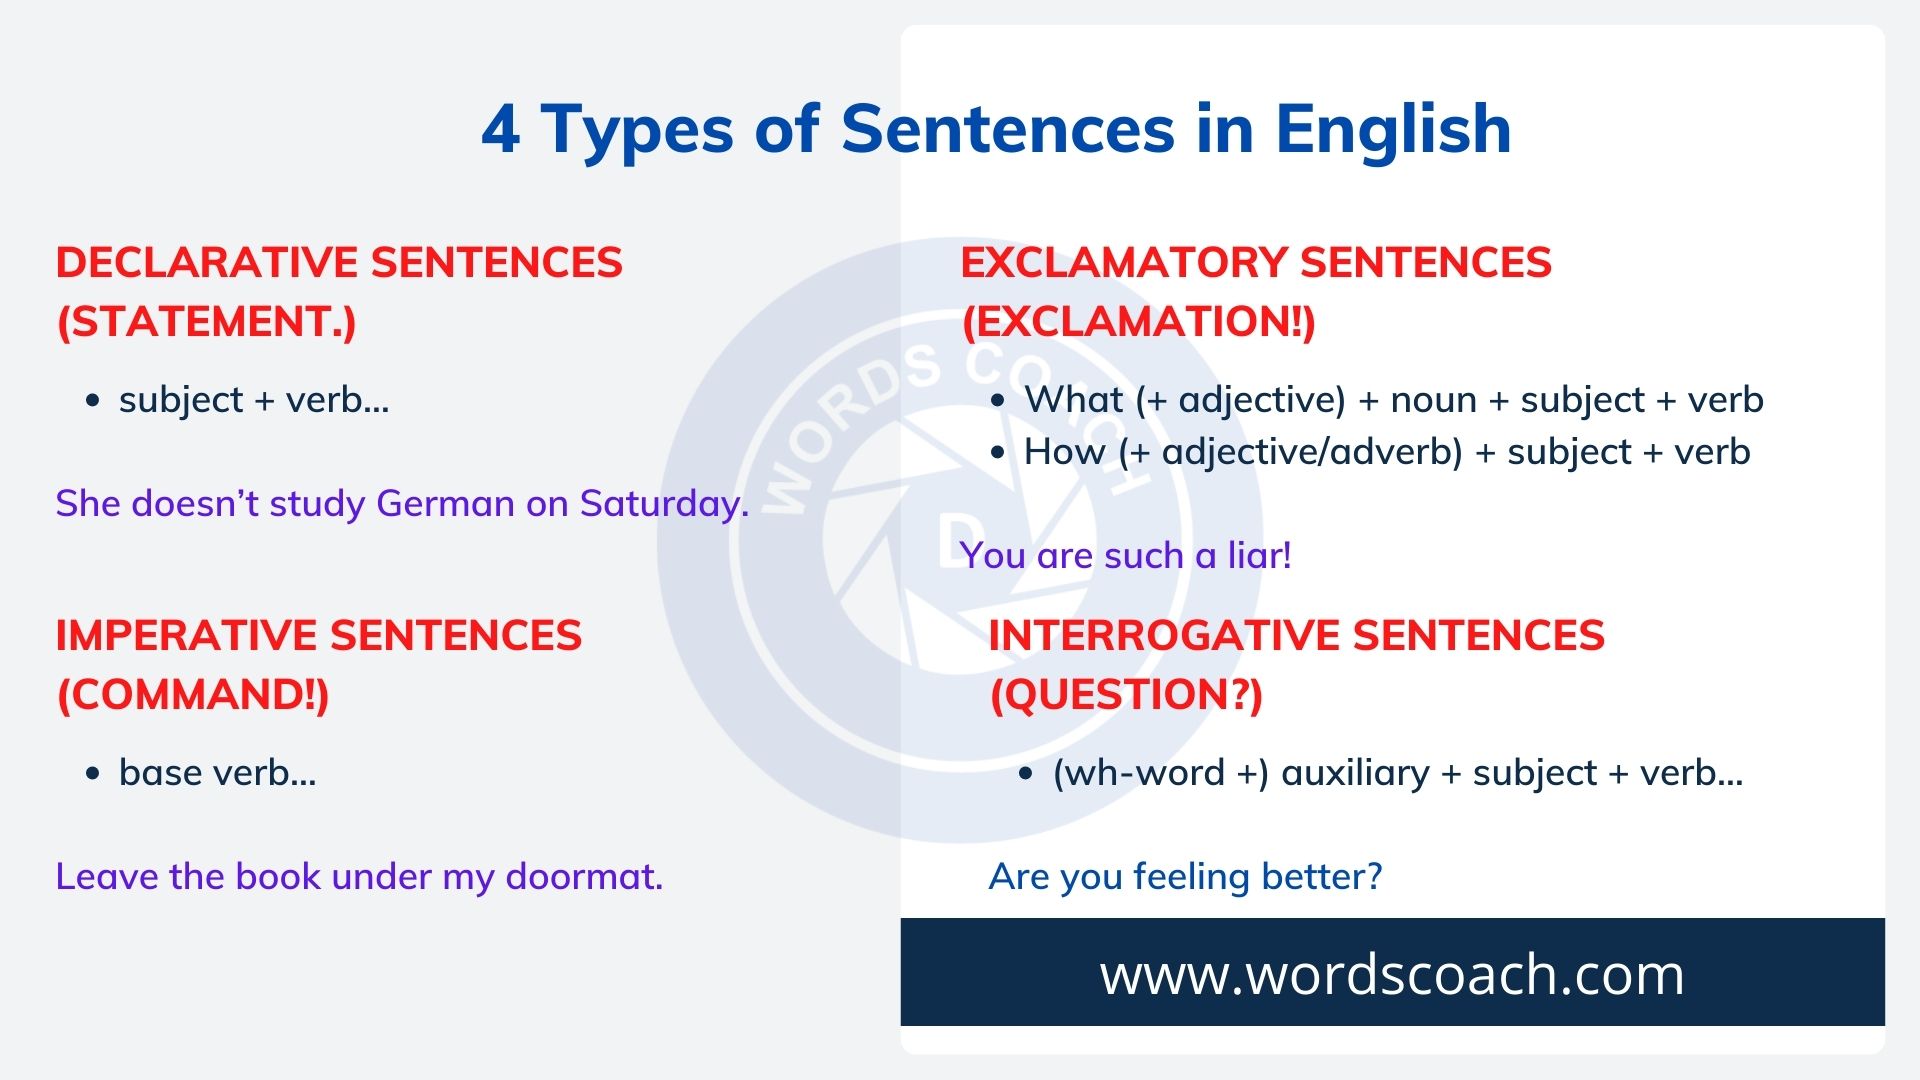 the 4 types of sentences